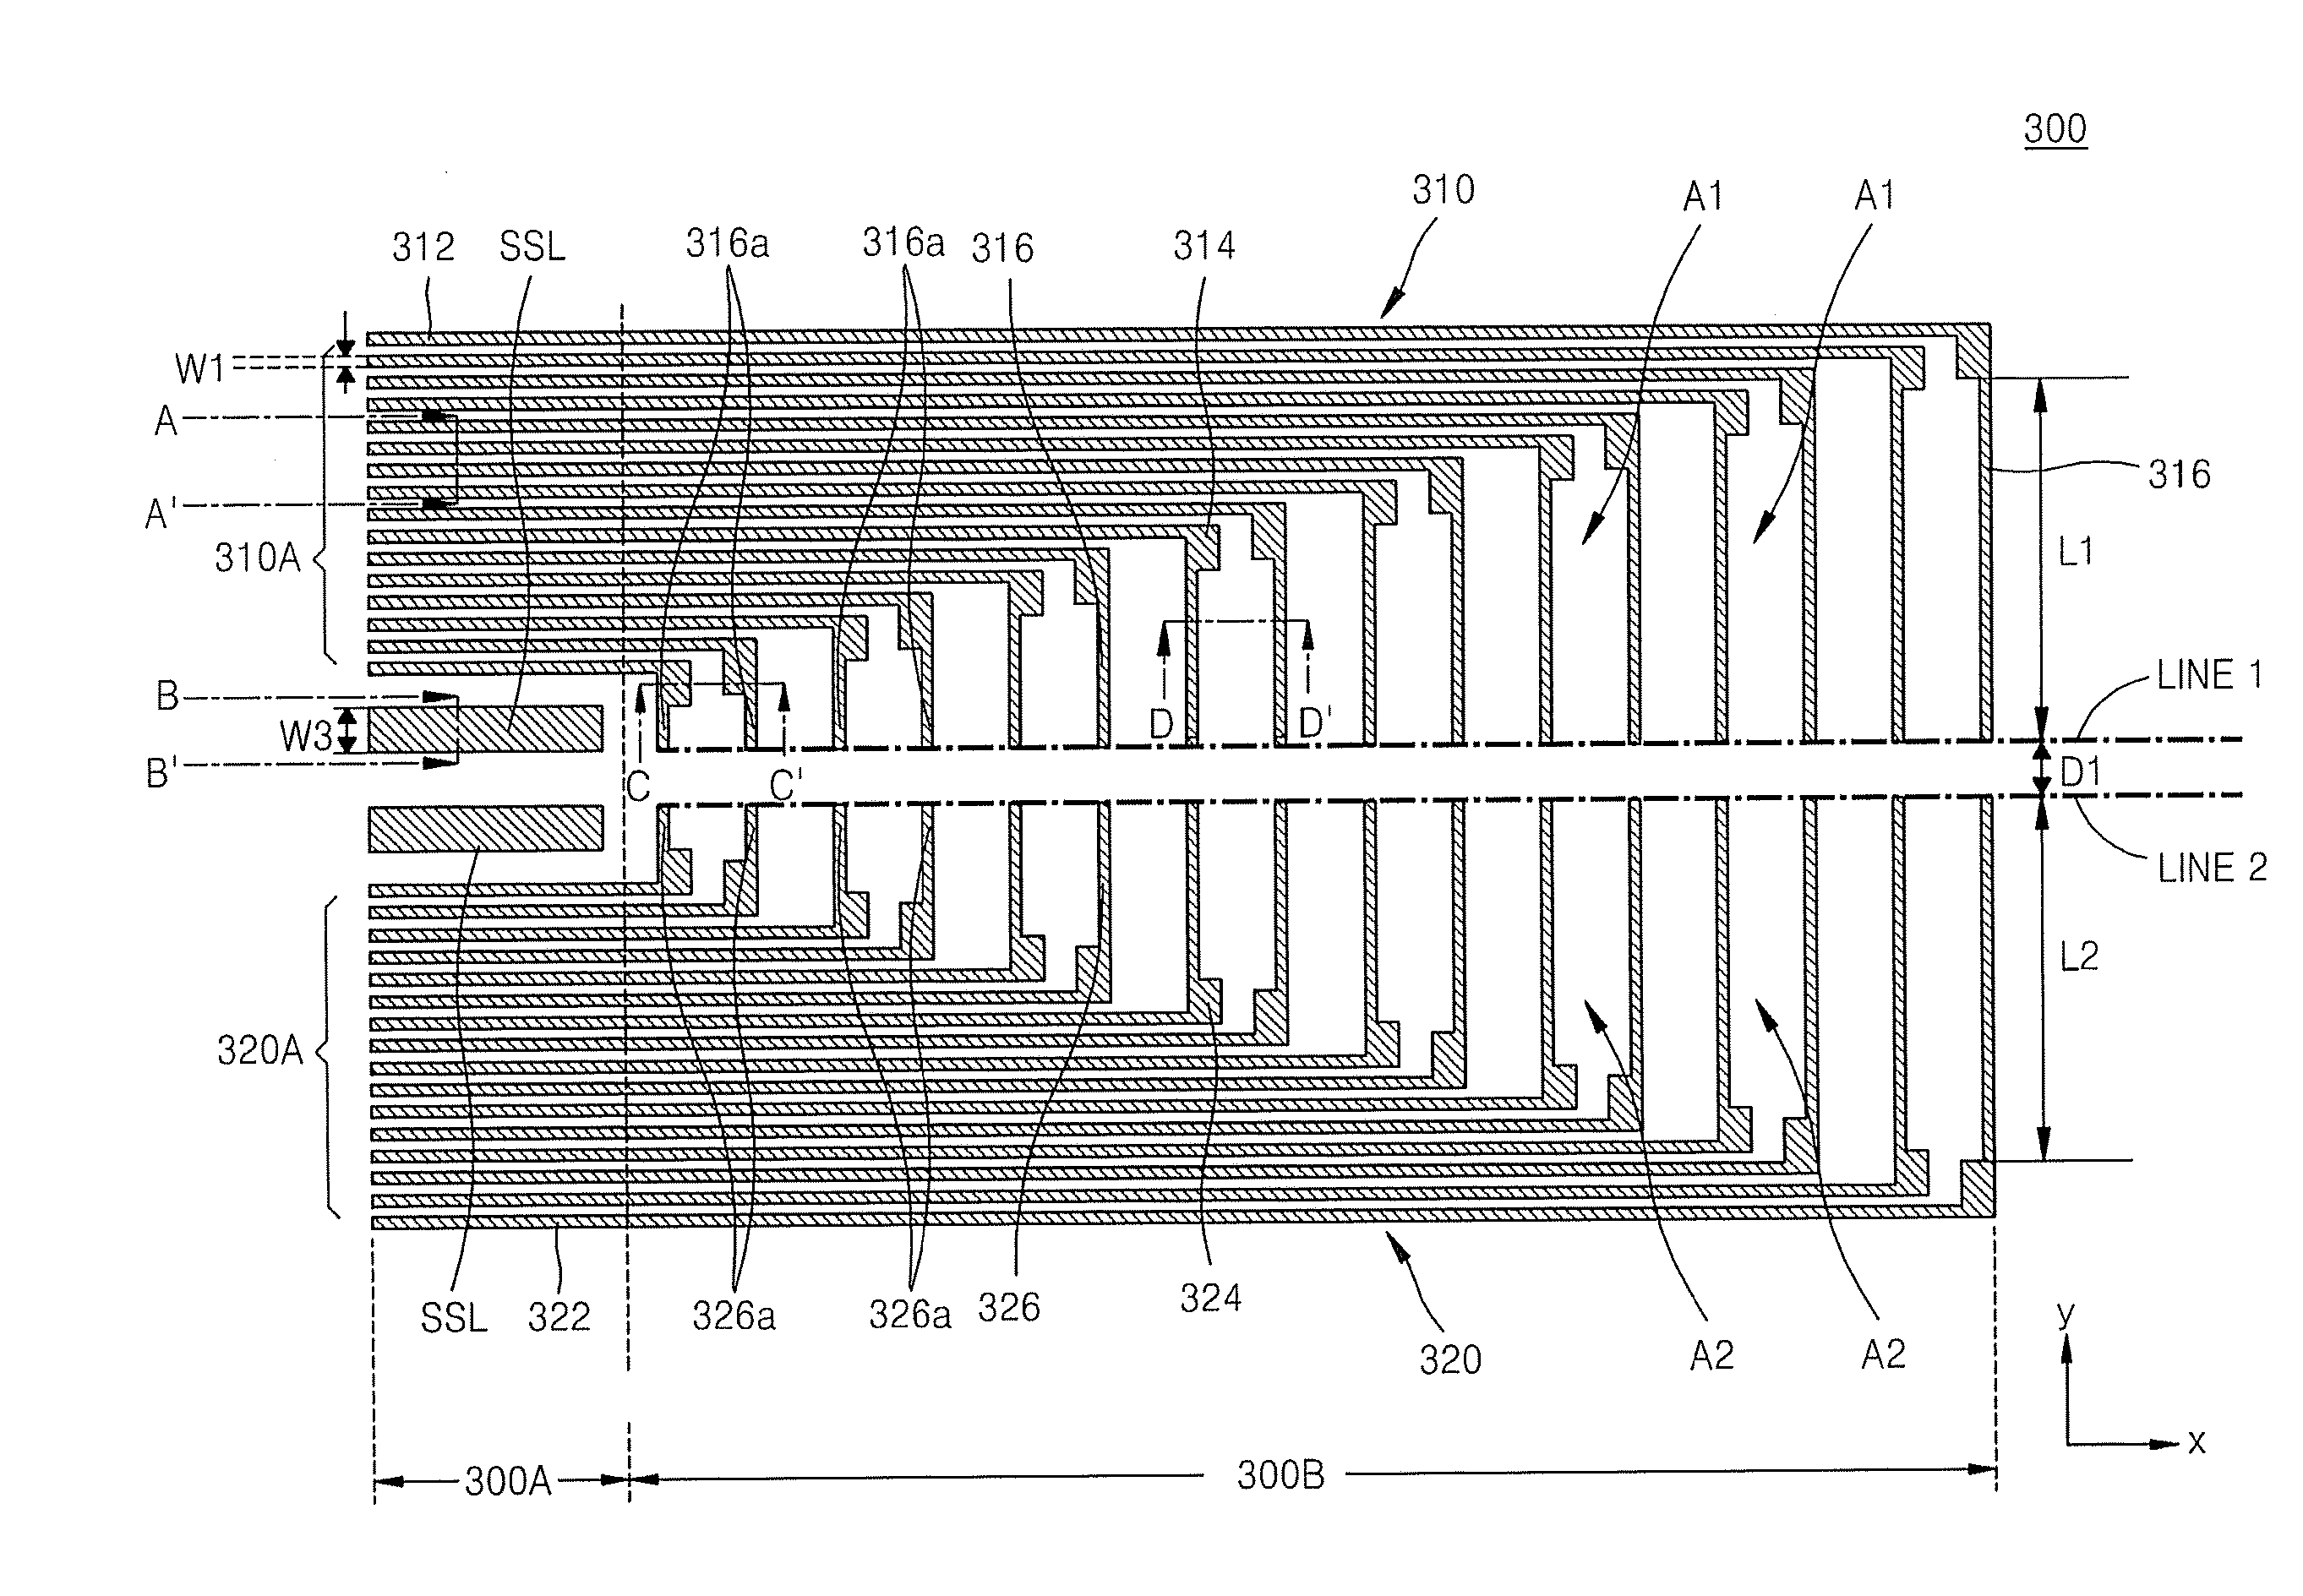 NAND flash memory devices having wiring with integrally-formed contact pads and dummy lines and methods of manufacturing the same